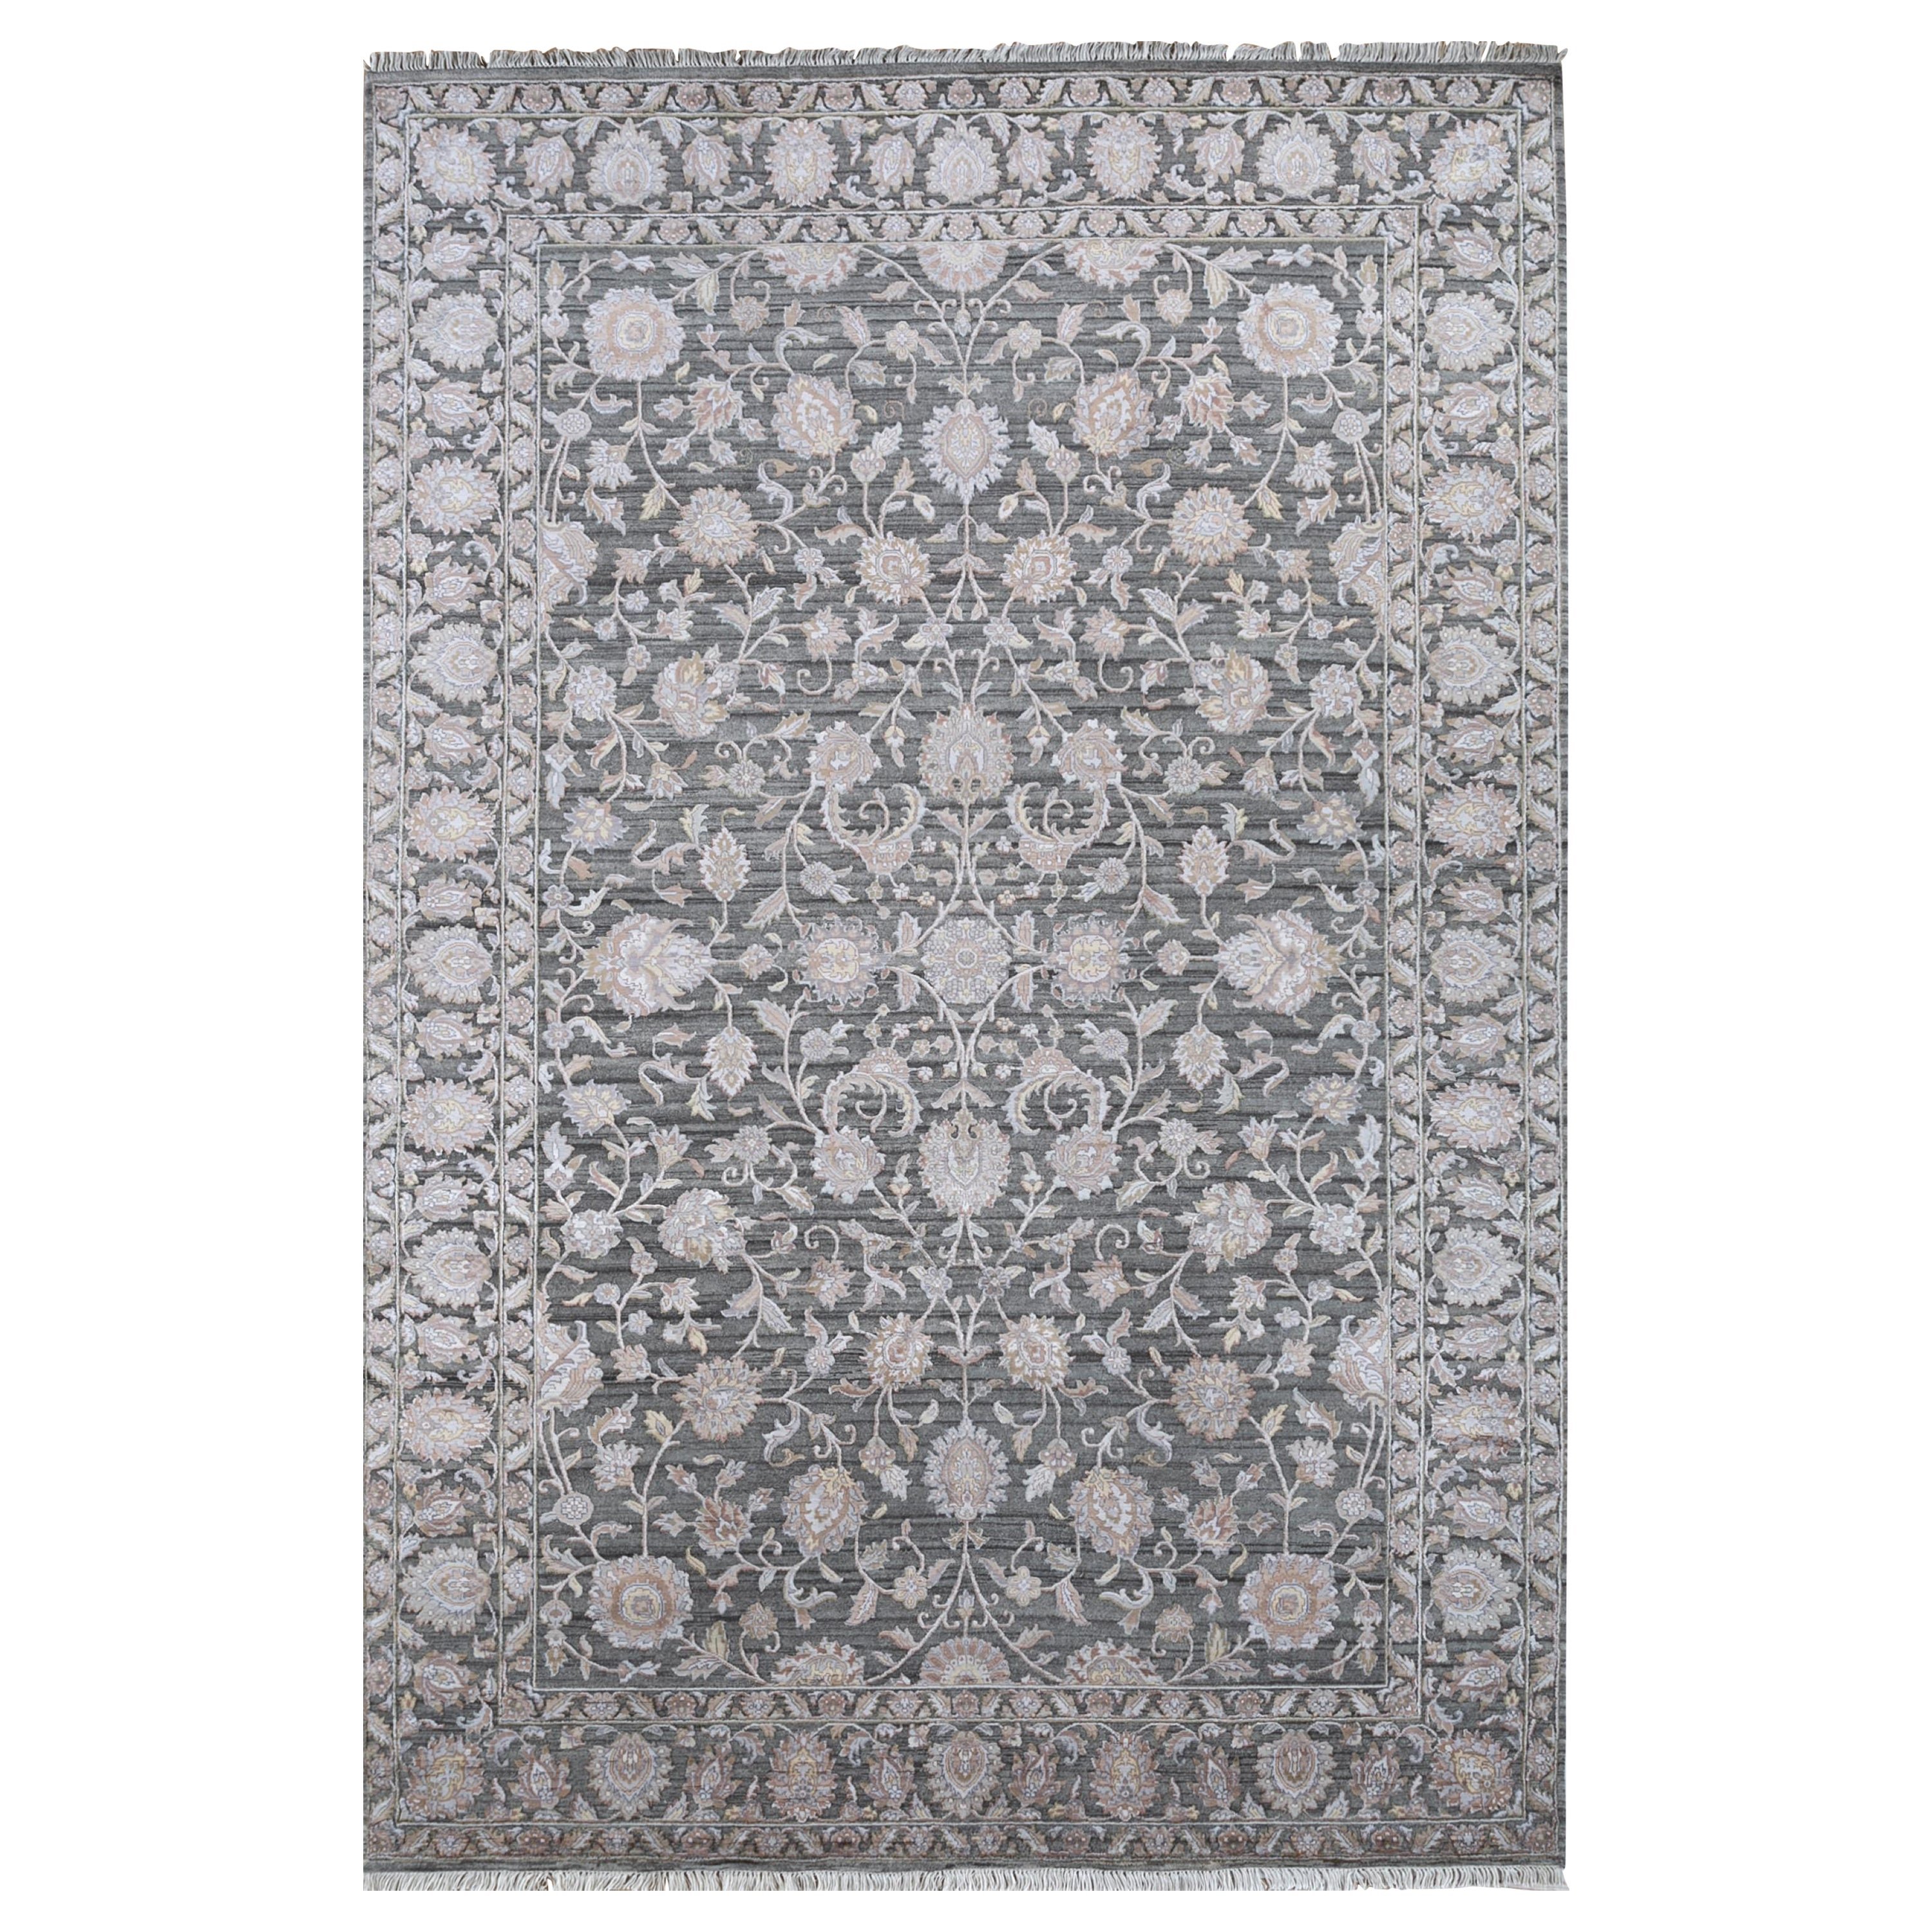 Persian Noir Silk Elegance Charcoal Gray 195X285 cm Handknotted Rug For Sale